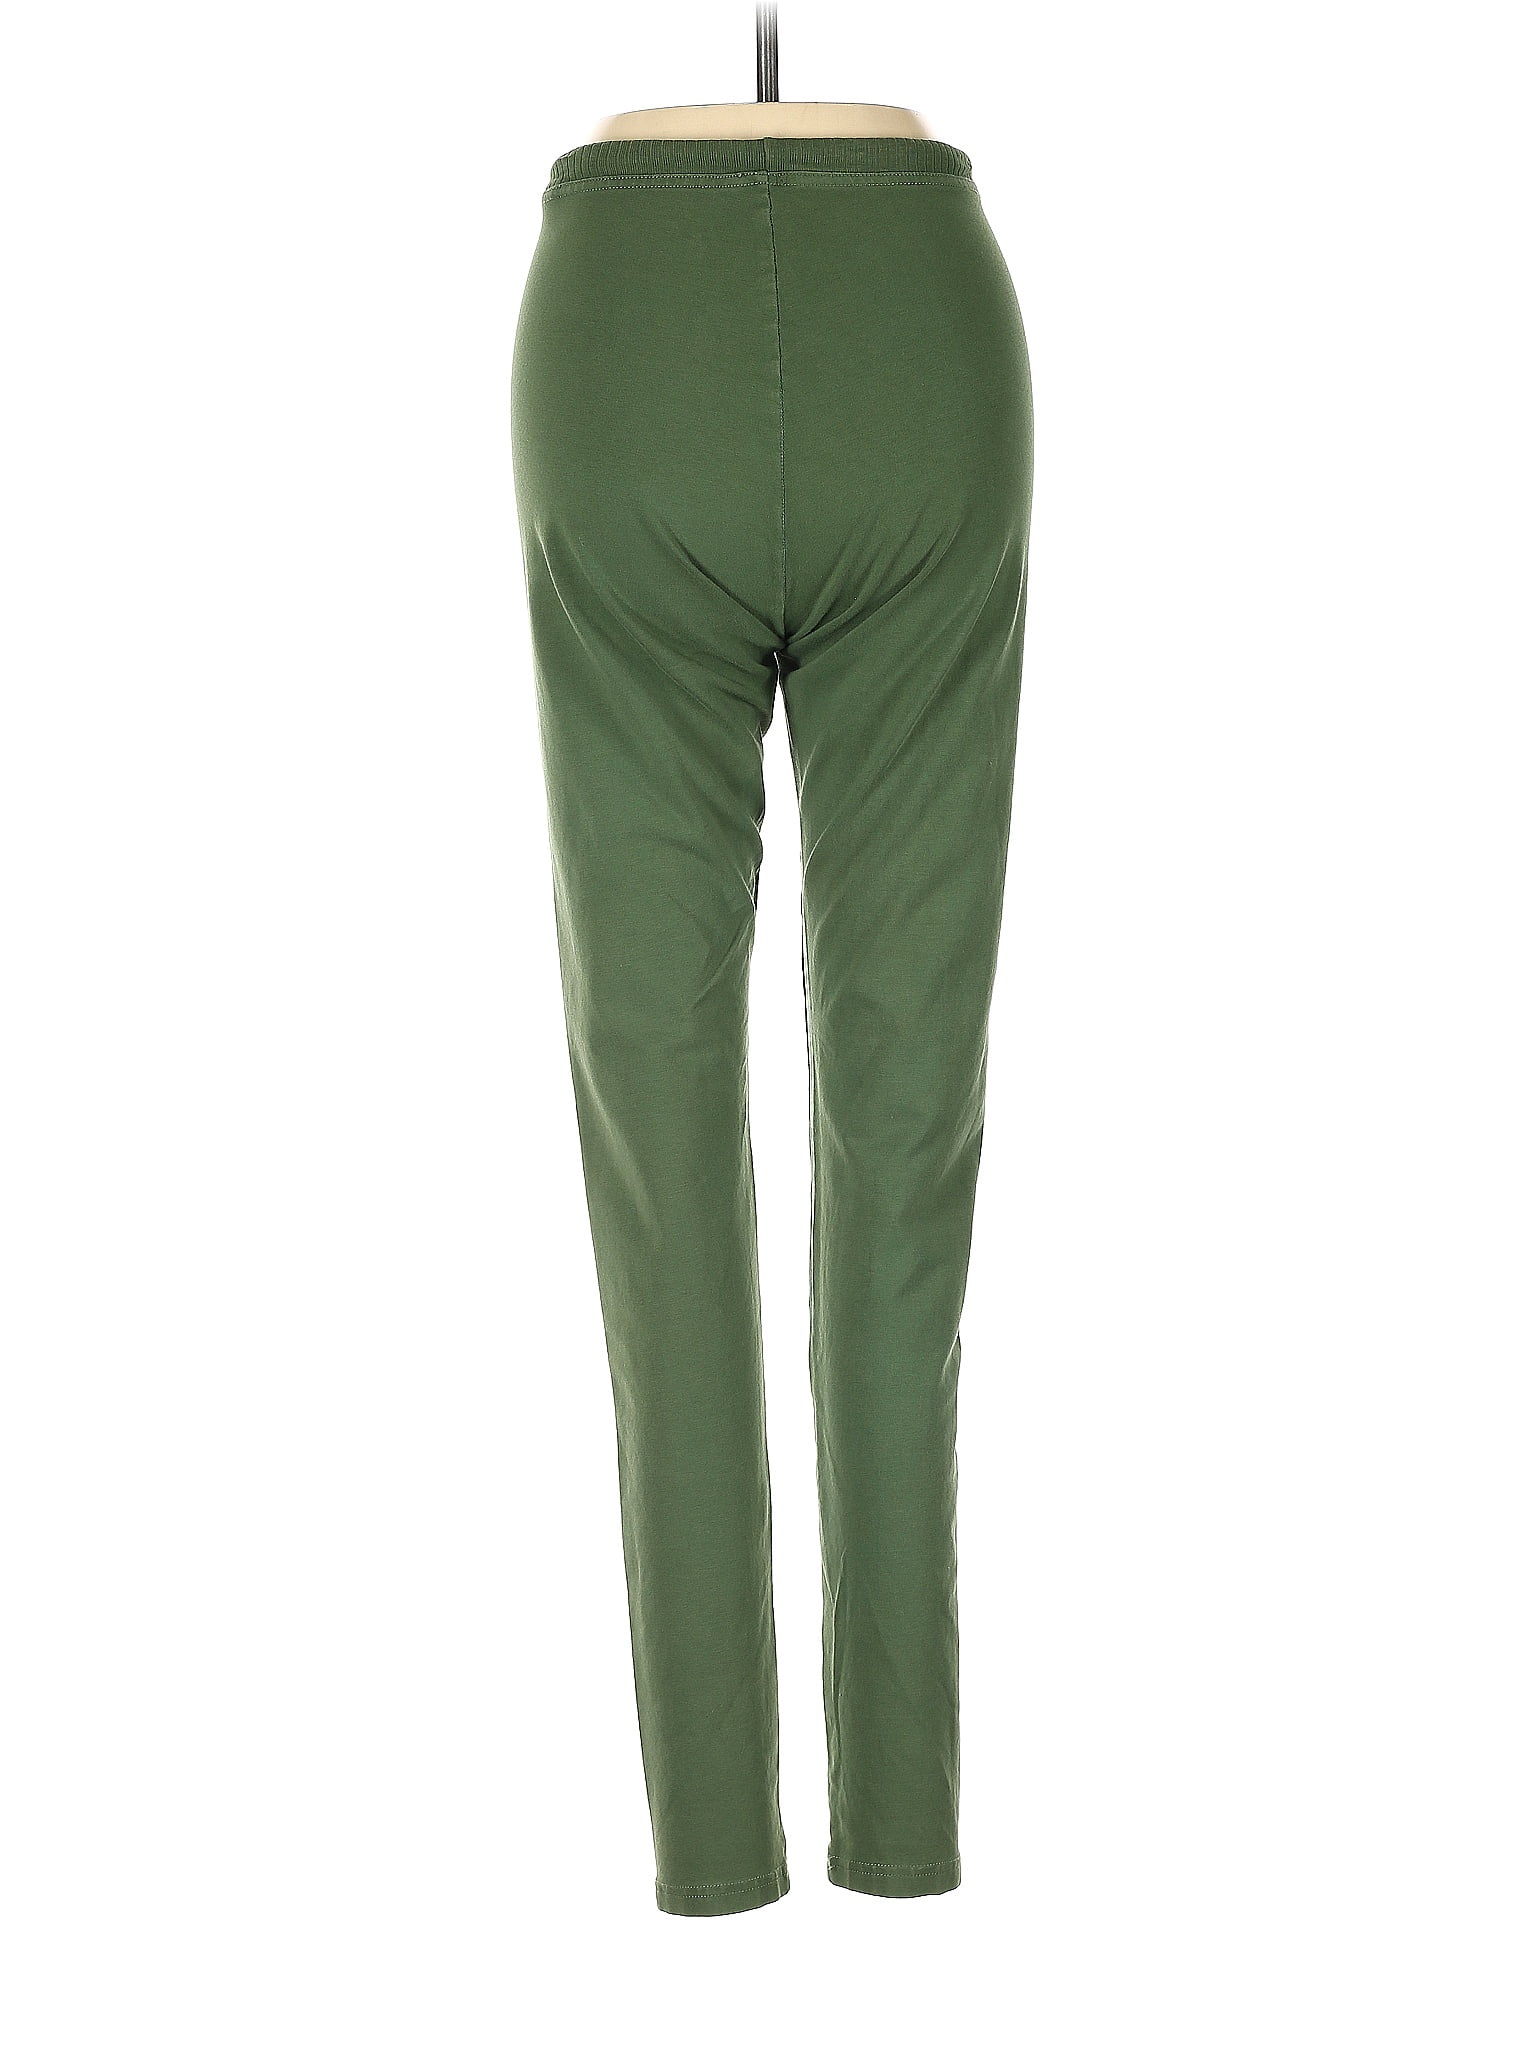 OFFLINE by Aerie Solid Green Leggings Size XL - 59% off